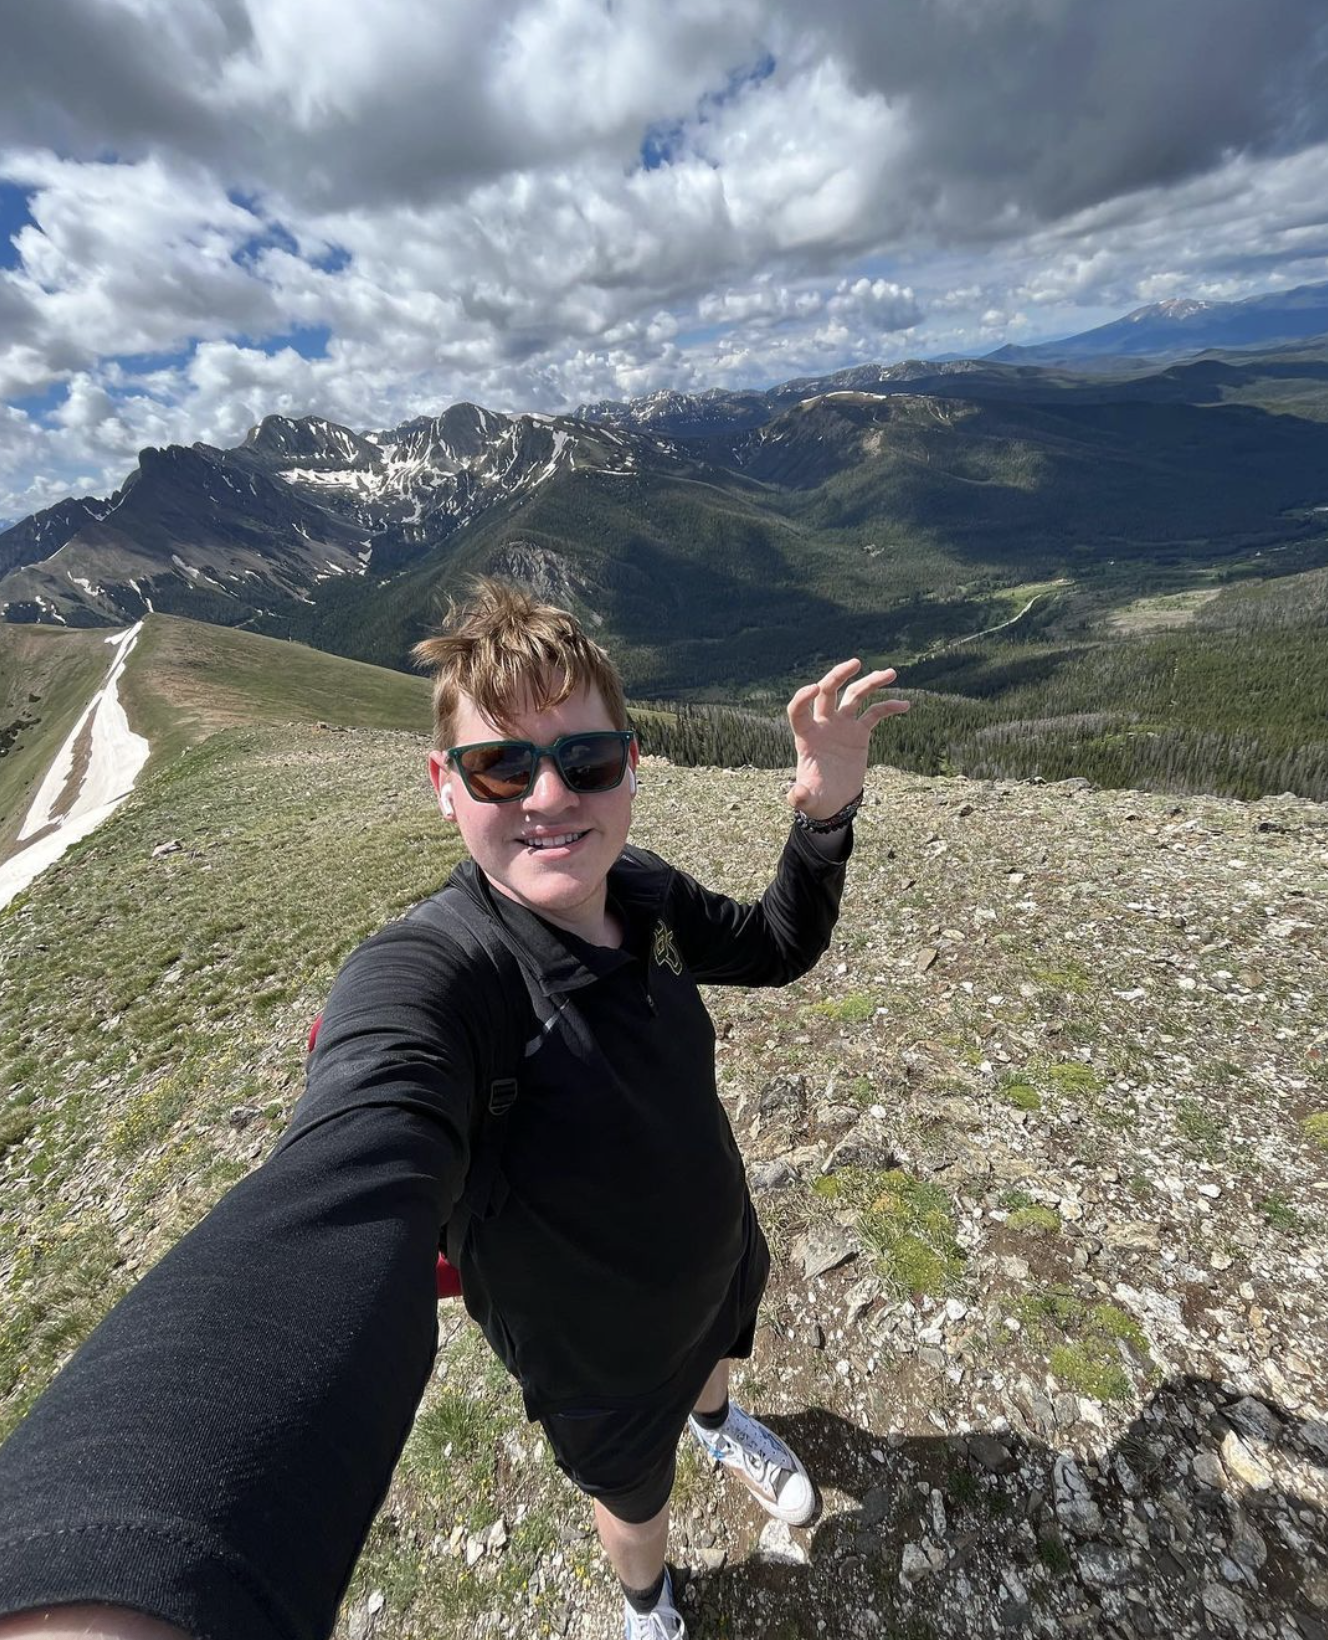 A student does a sic 'em on a mountain top